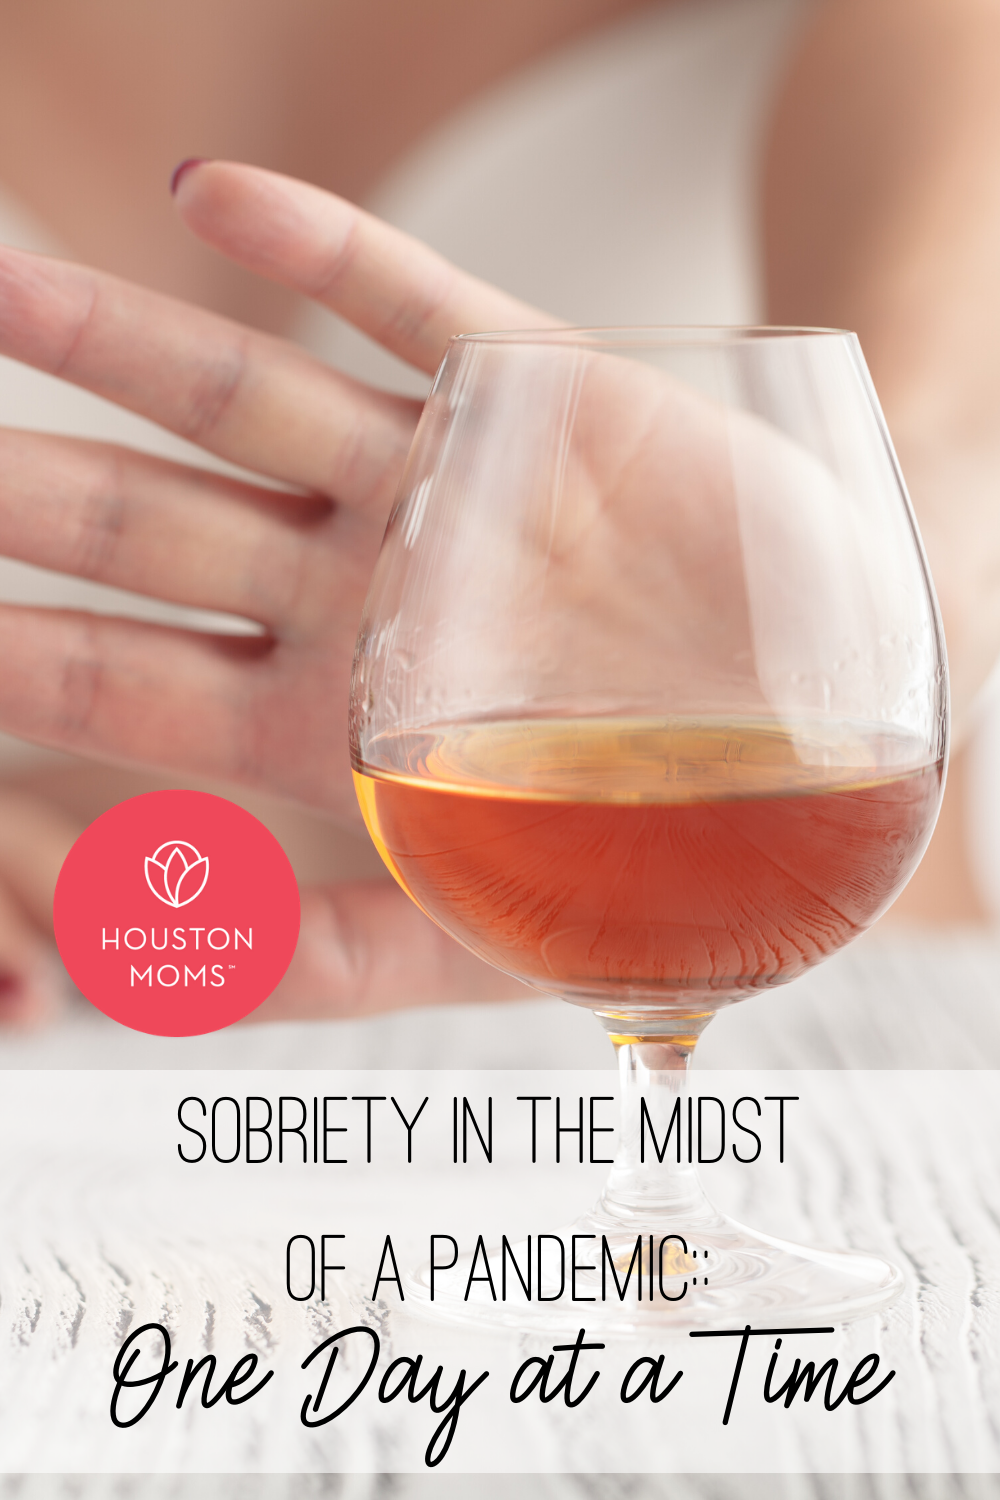 Houston Moms "Sobriety in the Midst of a Pandemic:: One Day at a time" #houstonmoms #houstonmomsblog #momsaroundhouston